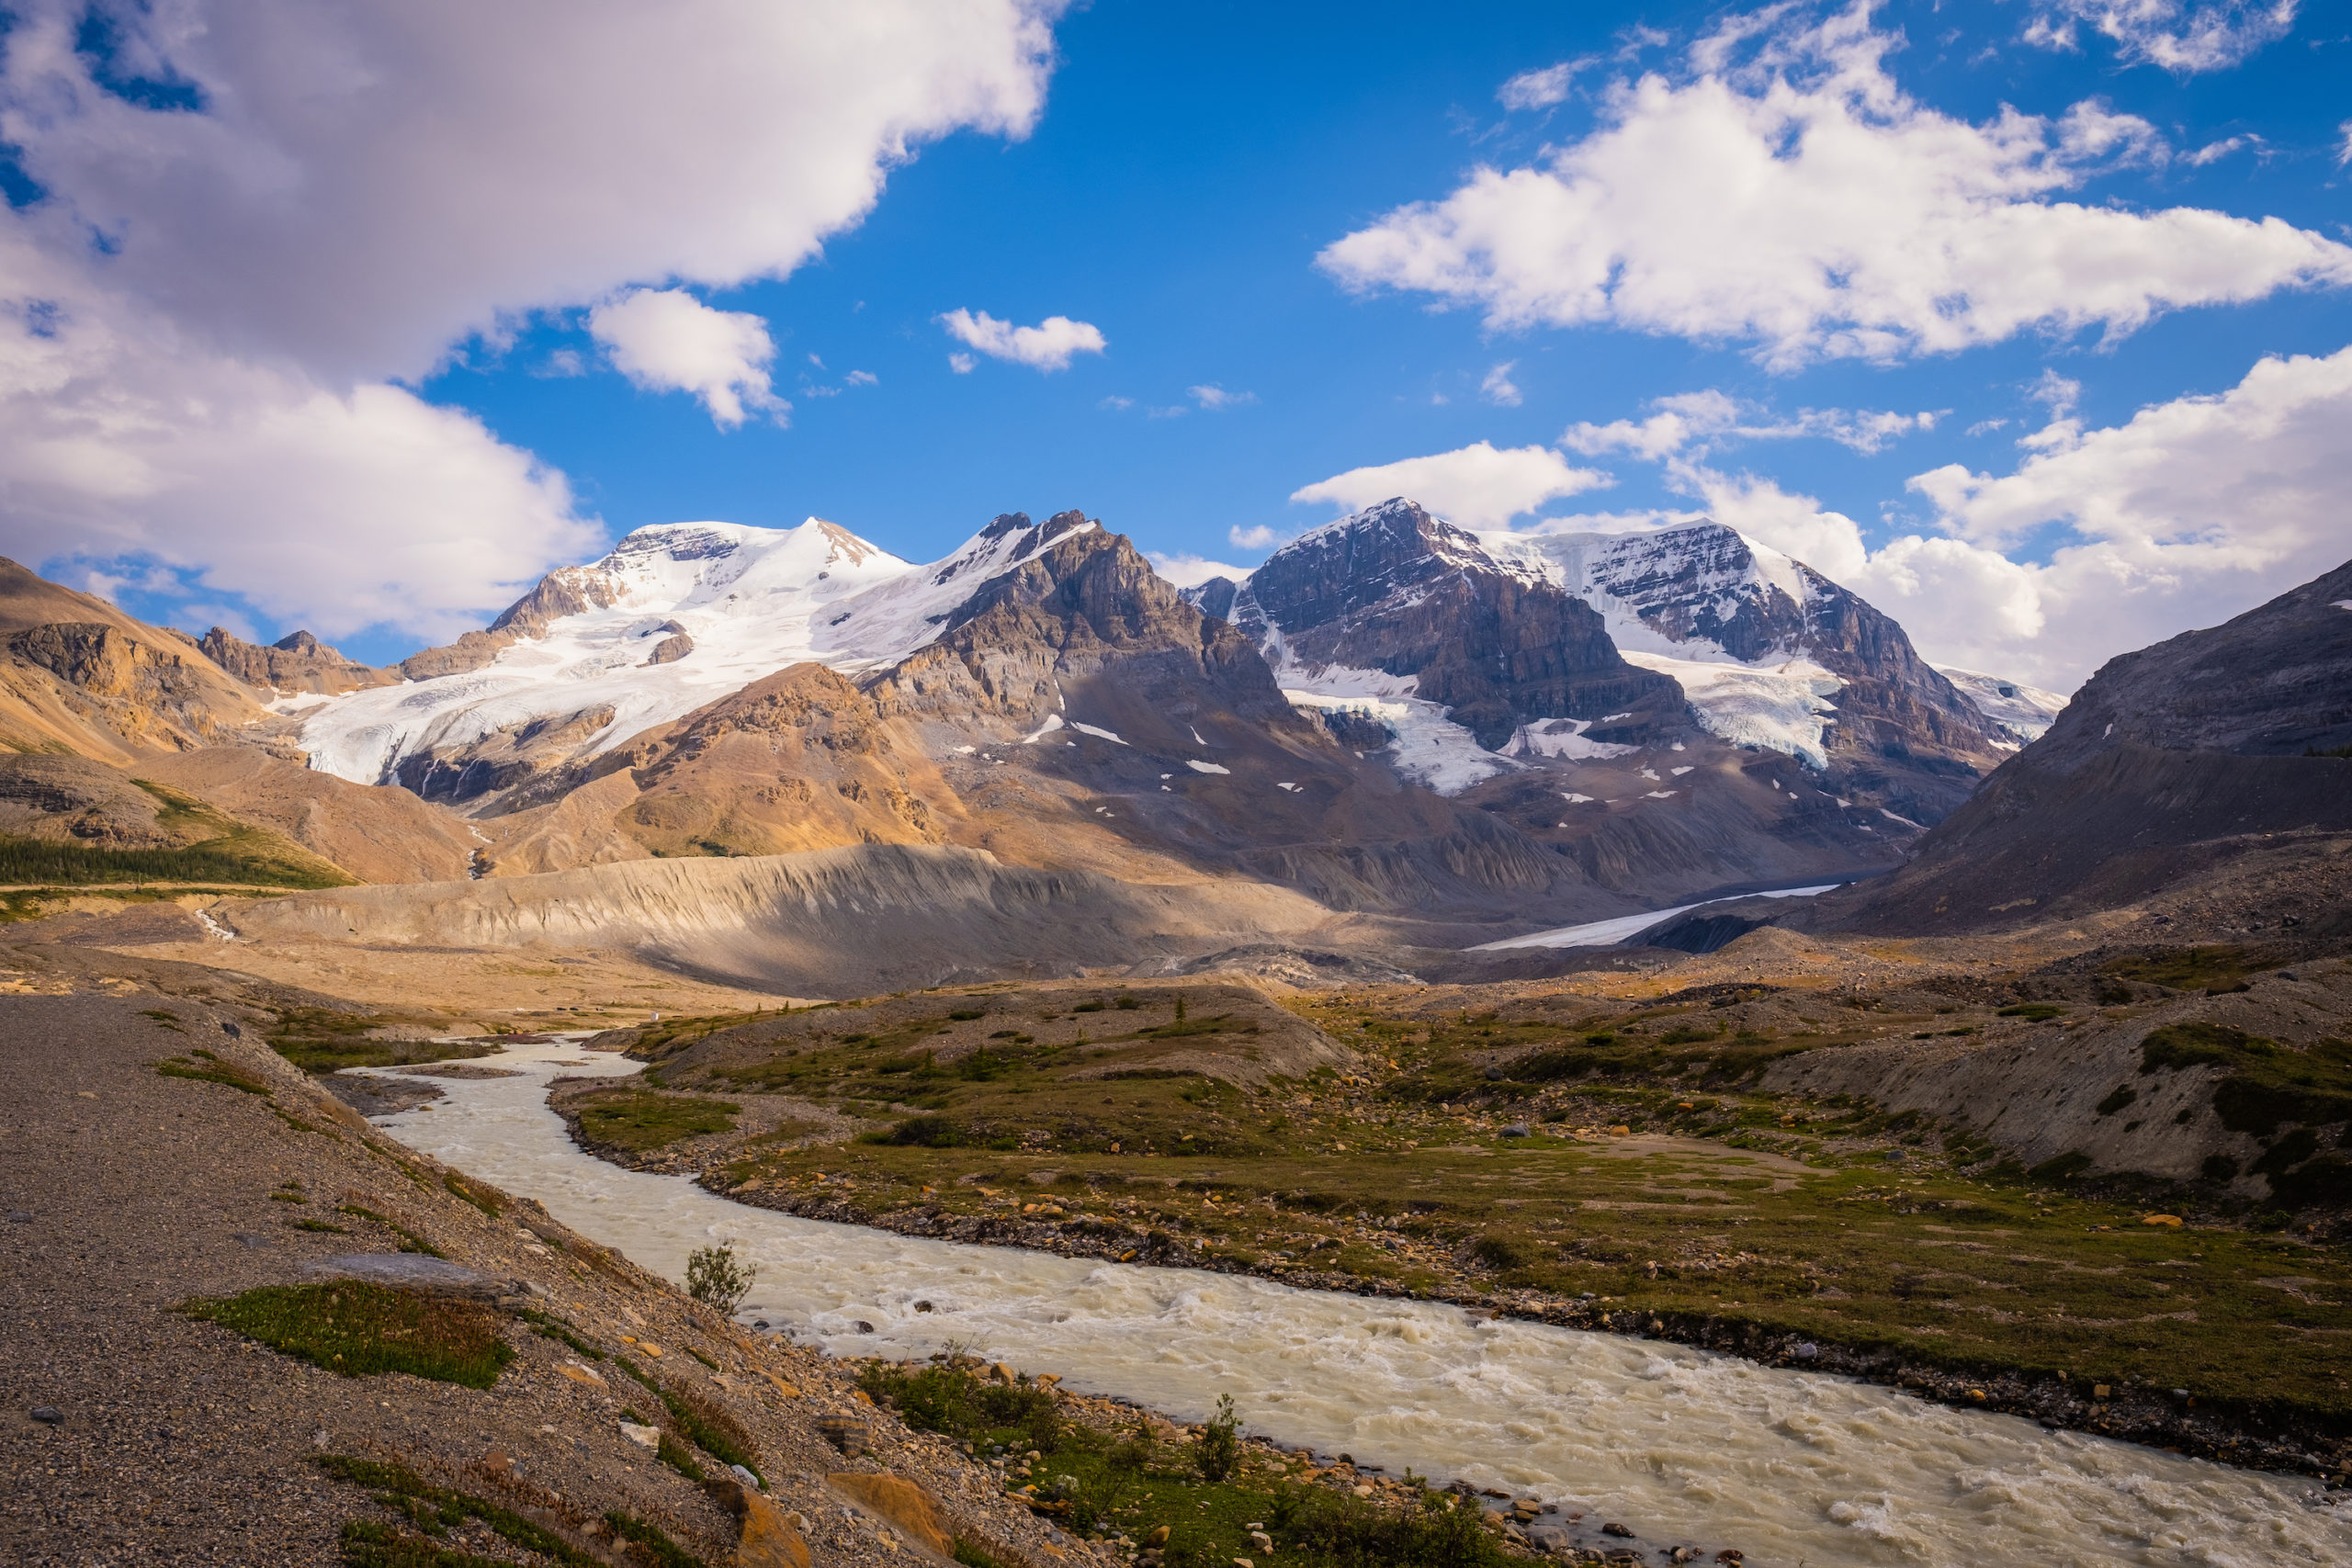 Mount-Athabasca-and-Andromeda-Icefields-Parkway-Banff